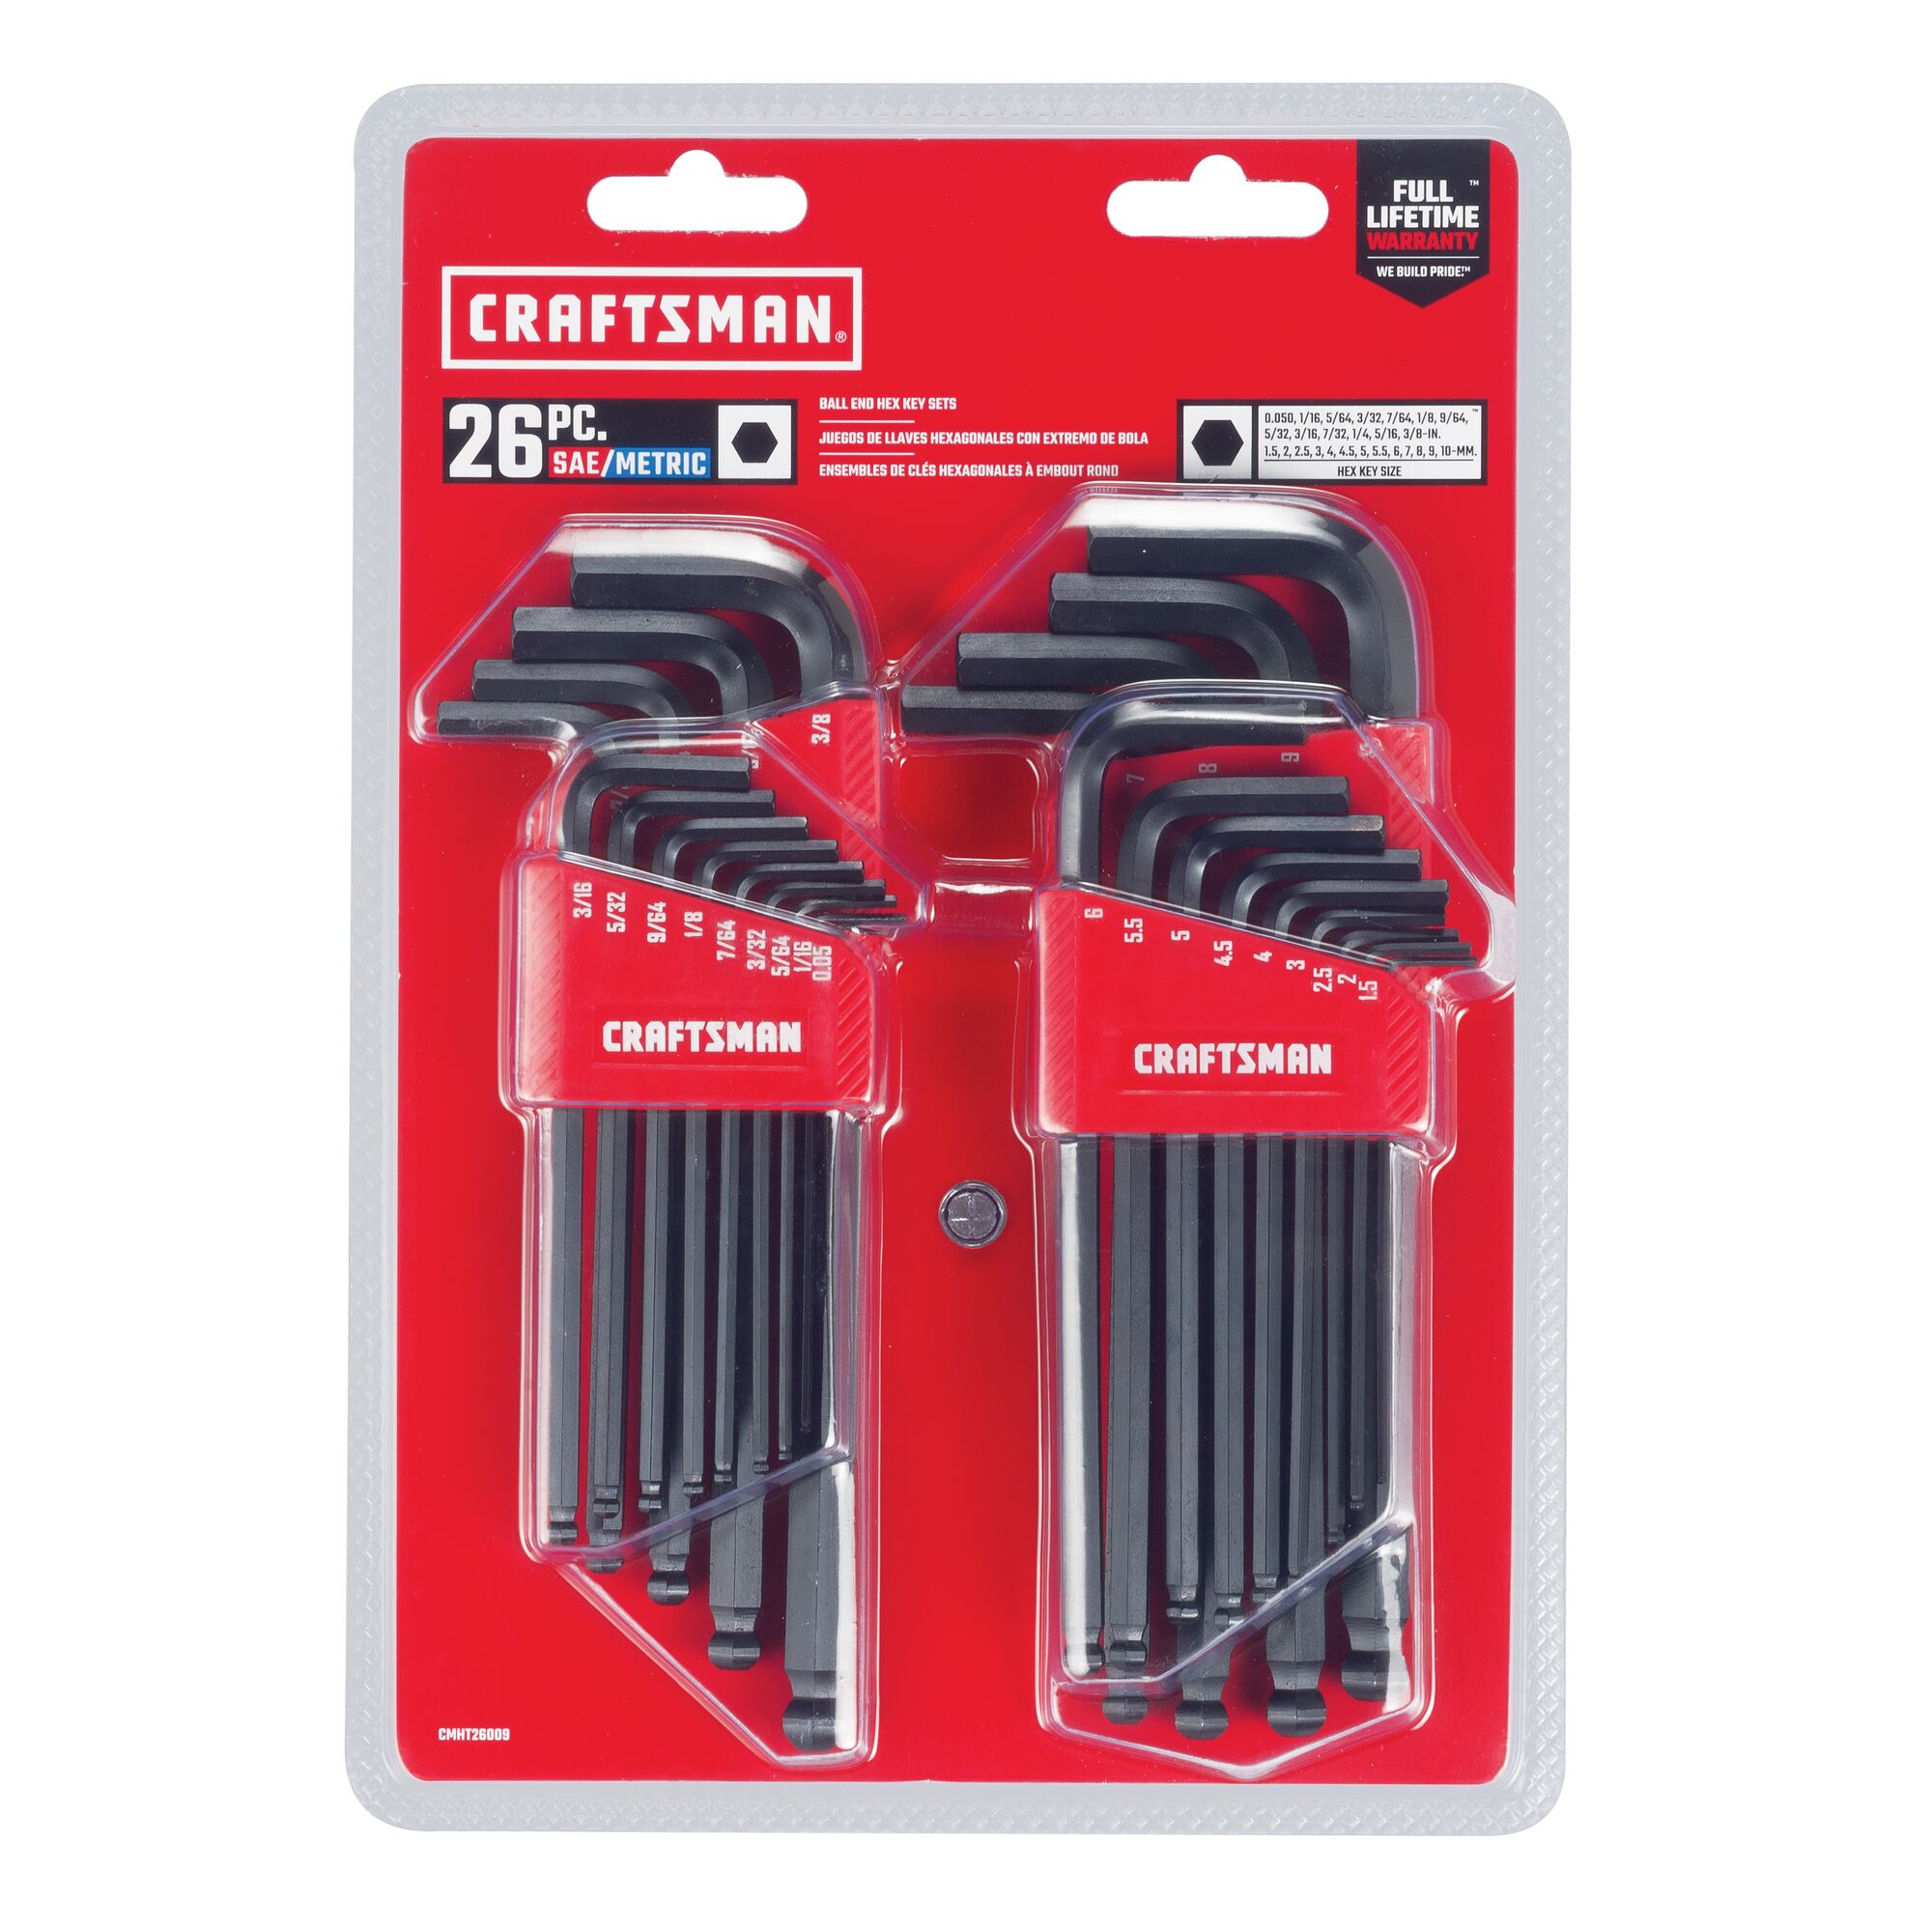 Set of 26 hex keys with ball end craftsman in plastic packaging.